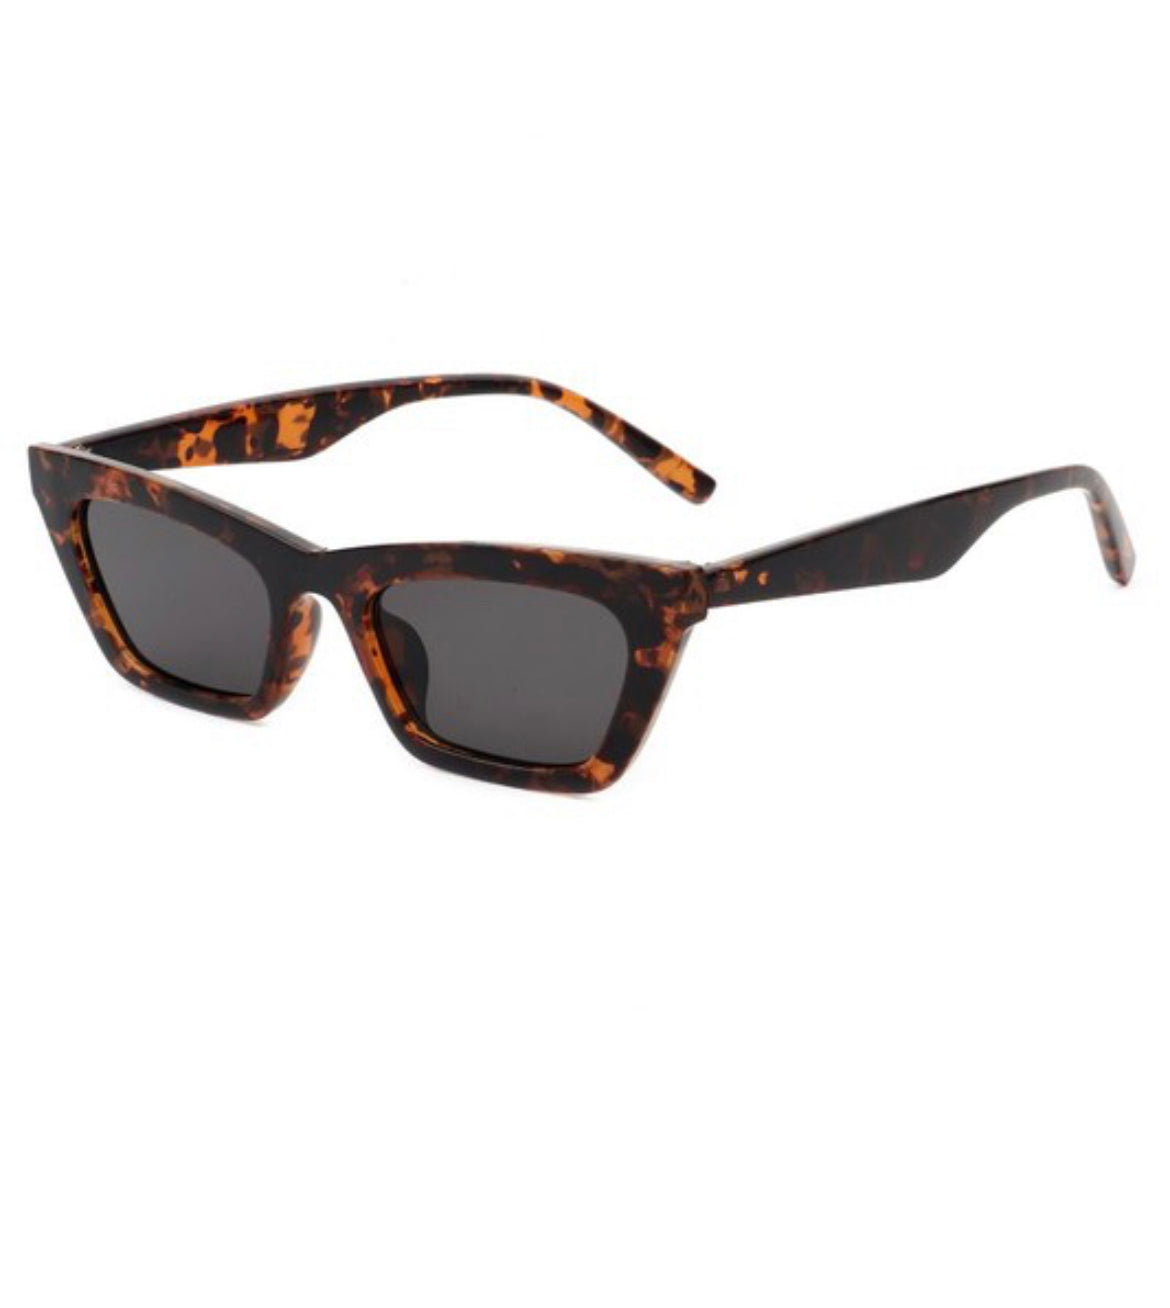 Favorite Summer Sunglasses (more colors available)